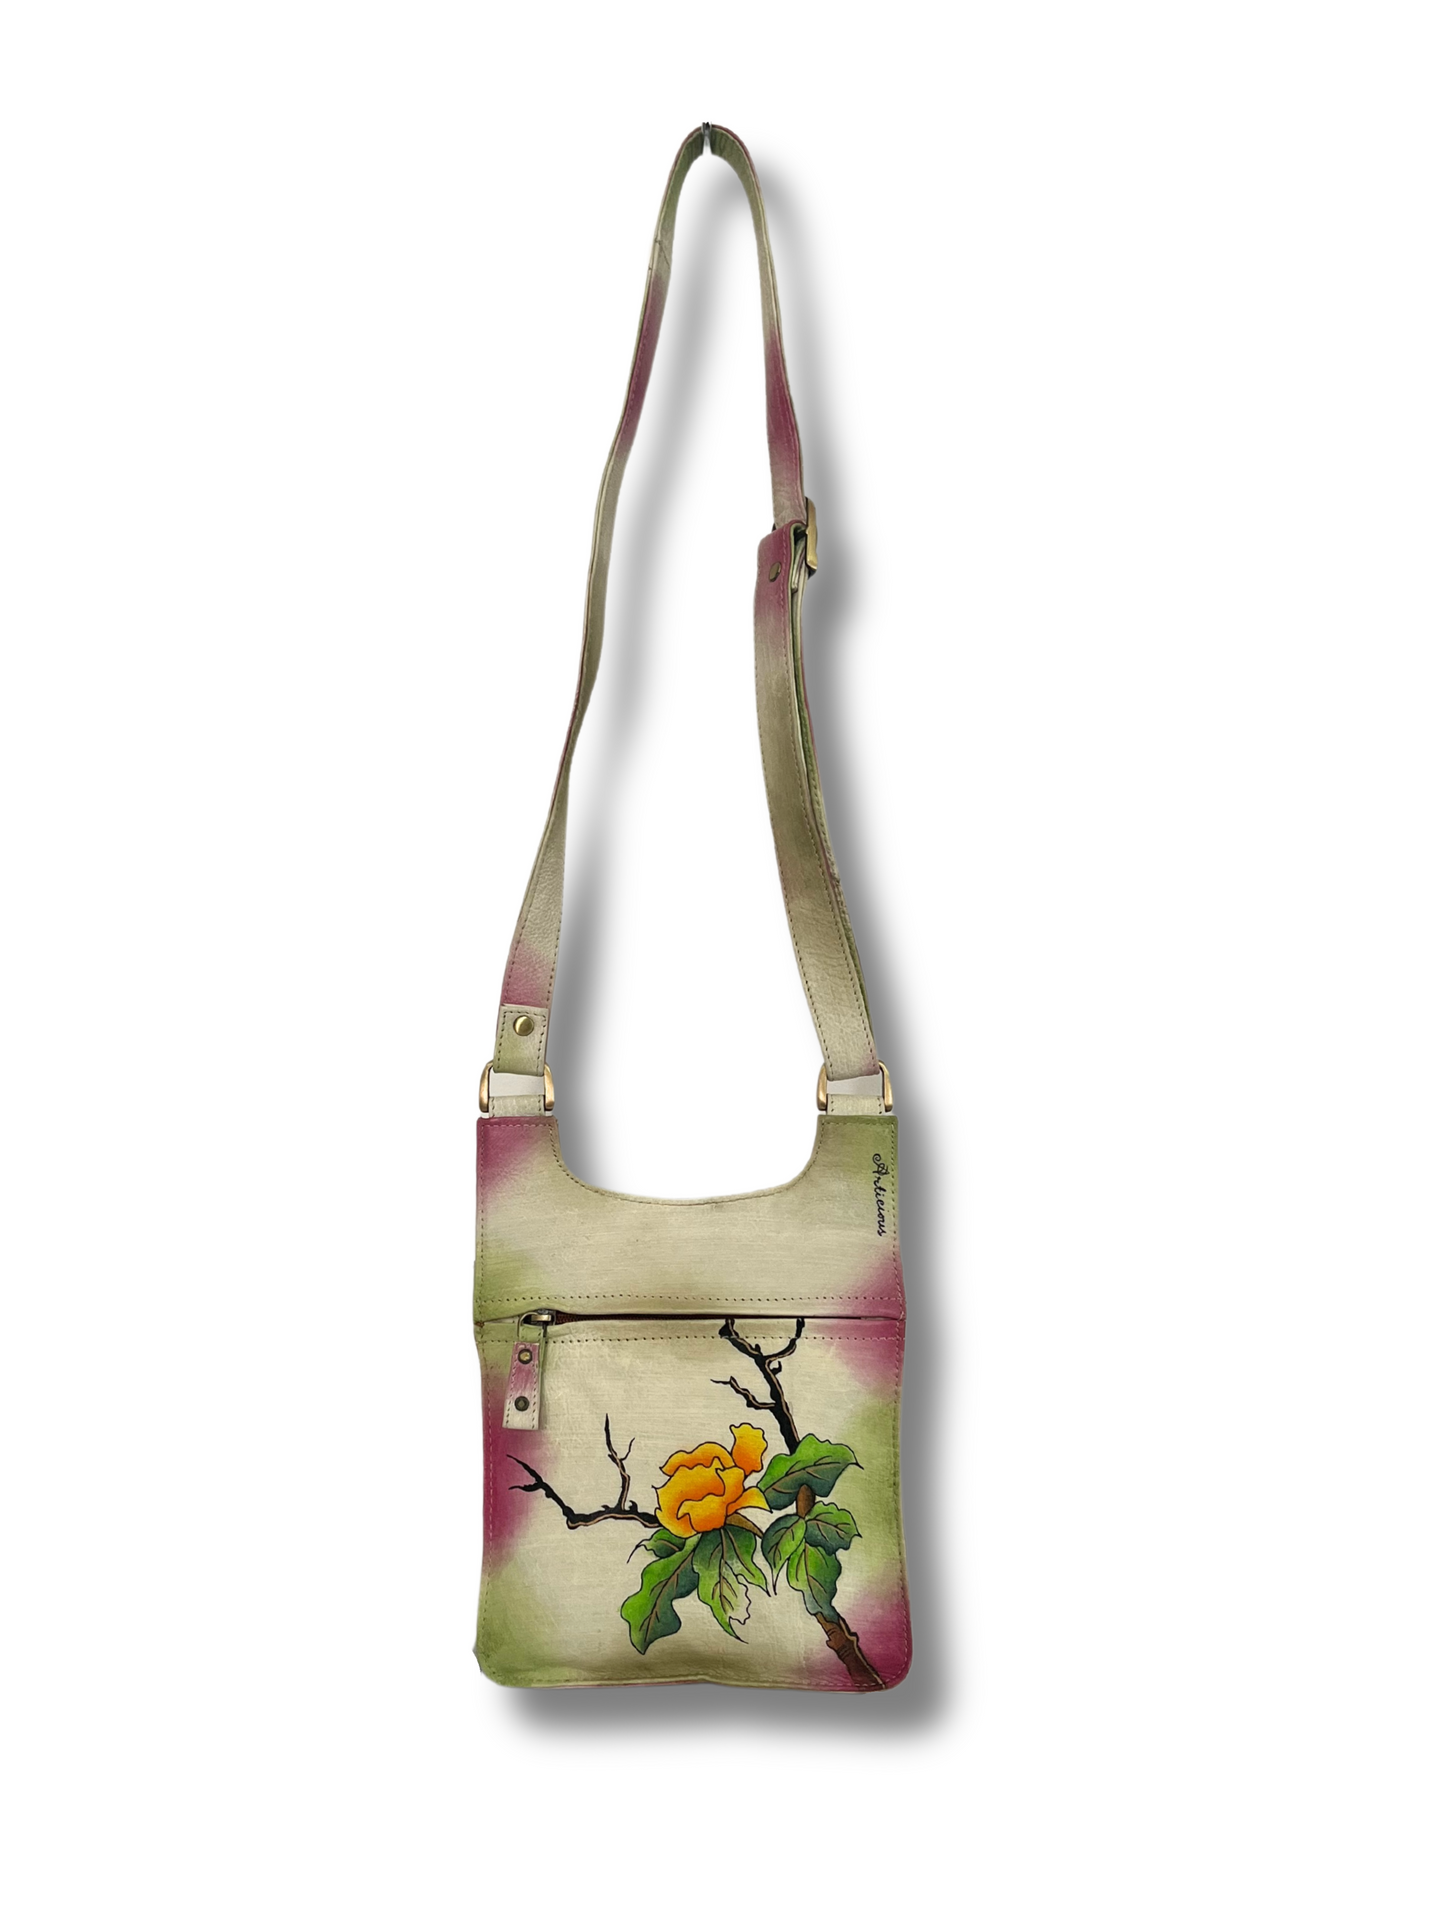 Amour hand-painted leather bag